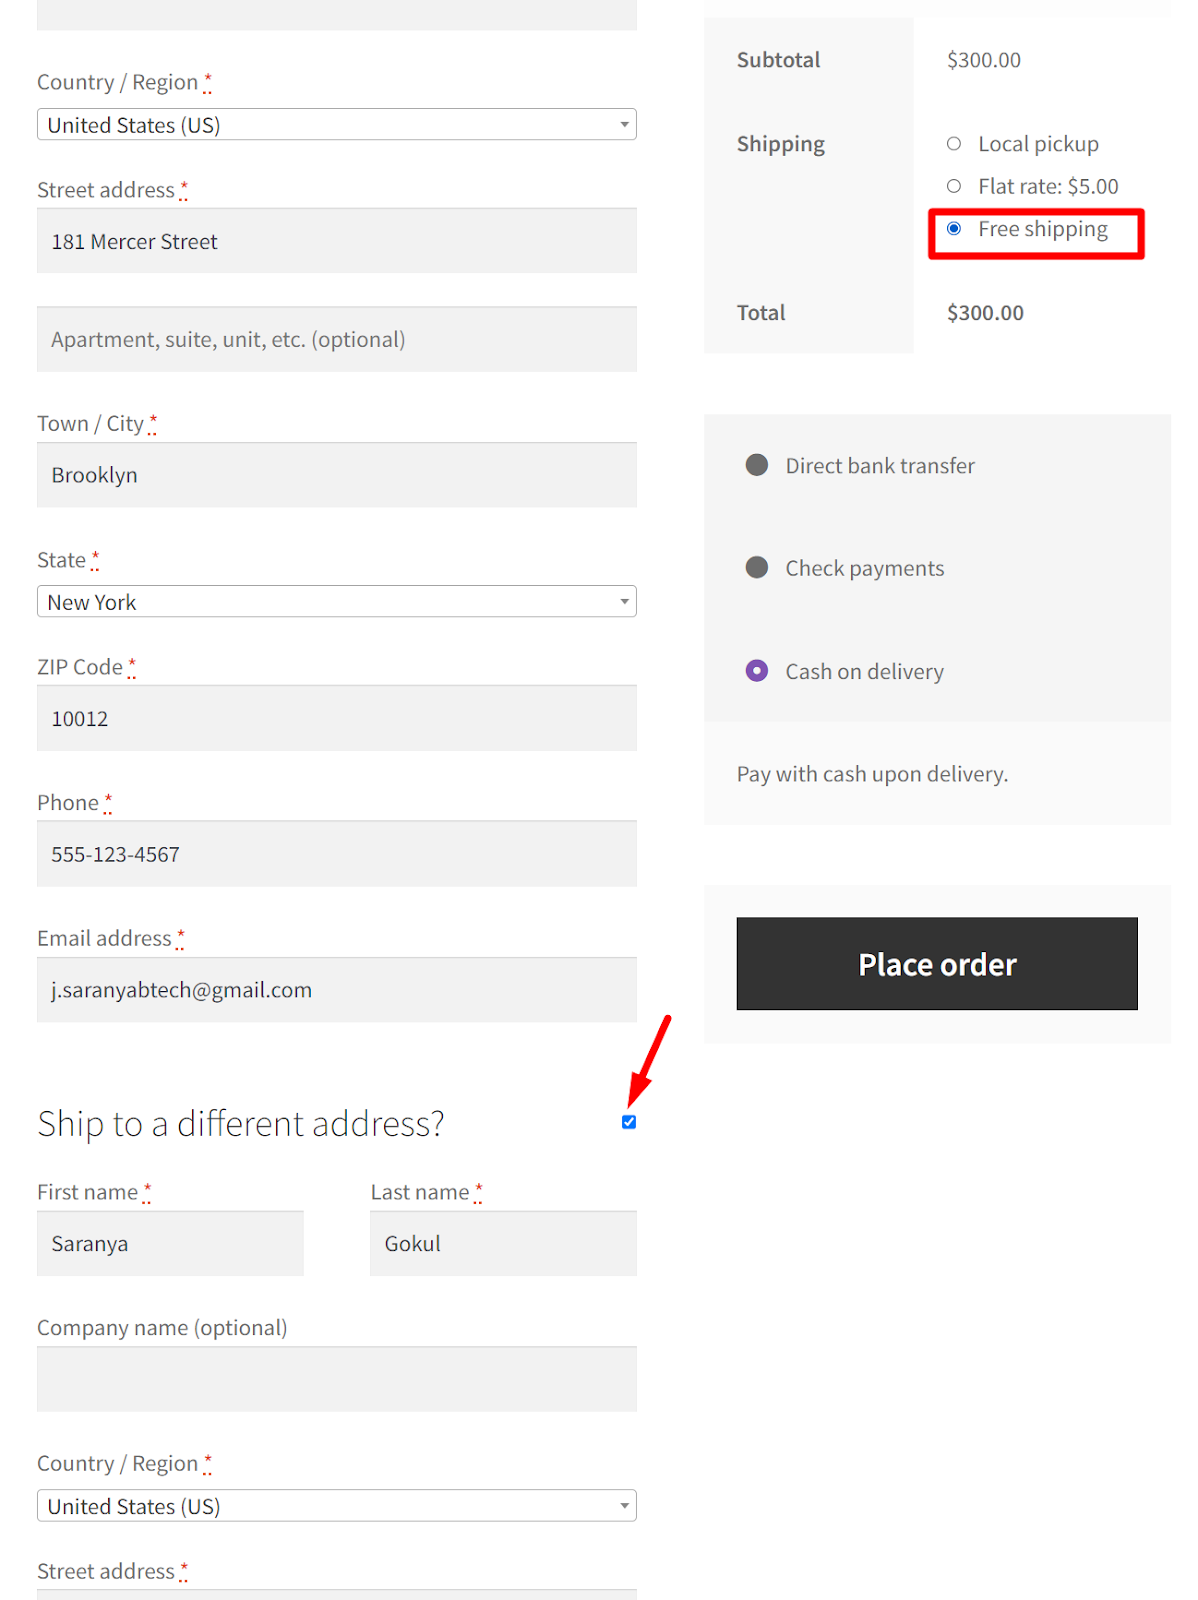 How to Enable 'Ship to Different Address' with Free Shipping and Flat Rate in WooCommerce? - Tyche Softwares